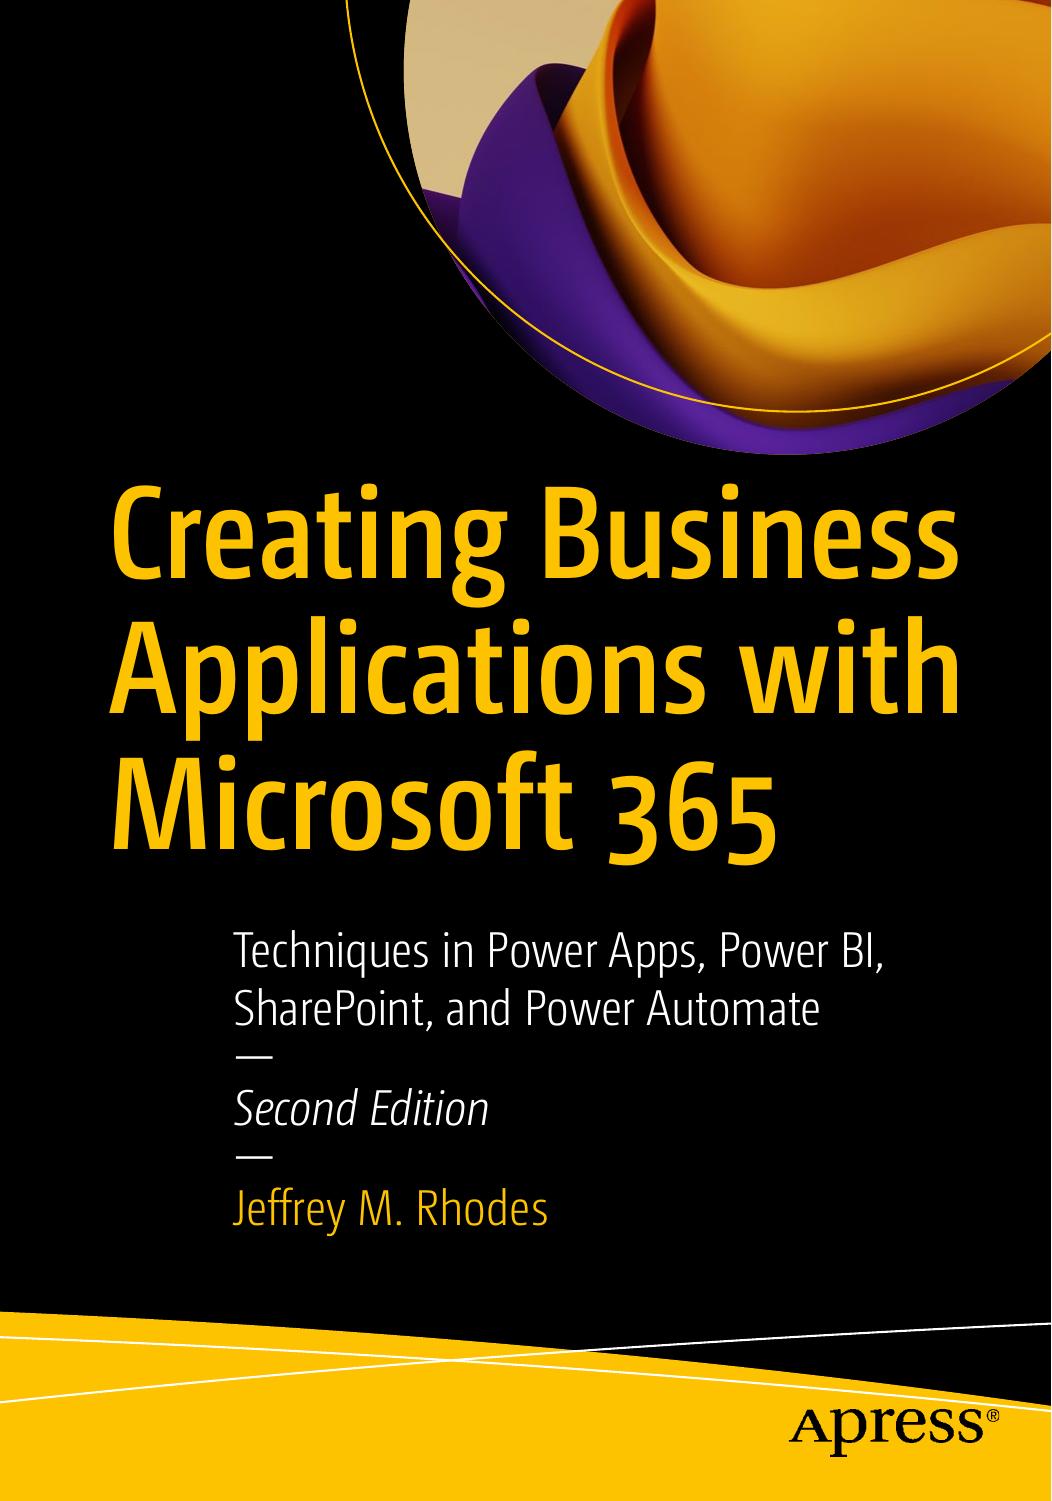 Creating Business Applications with Microsoft 365: Techniques in Power Apps, Power BI, SharePoint, and Power Automate by Jeffrey M. Rhodes